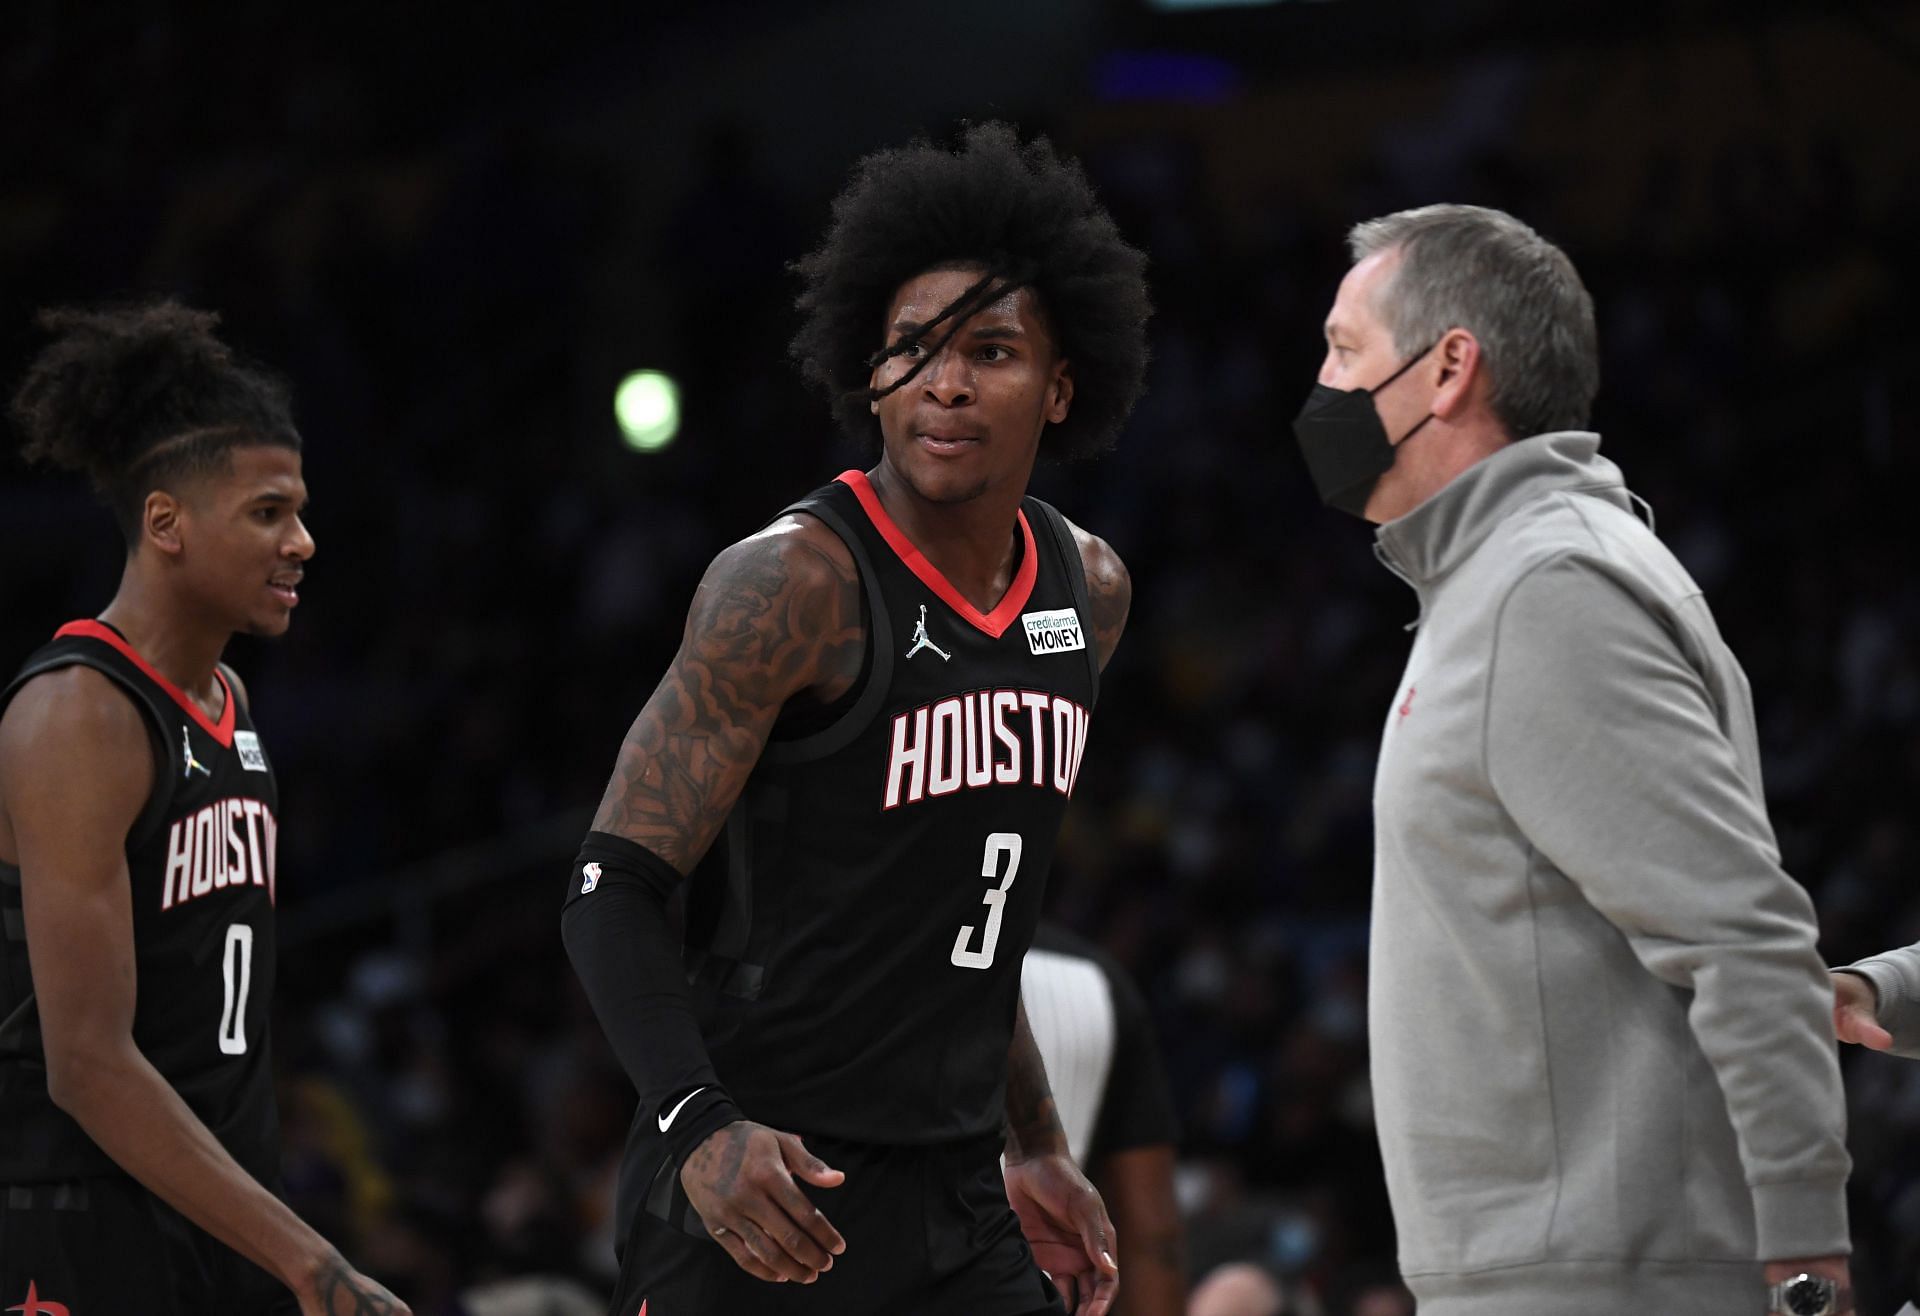 Kevin Porter Jr. #3 of the Houston Rockets reacts during a break in the action against the Los Angeles Lakers during the second half of the game at Staples Center on October 31, 2021 in Los Angeles, California.